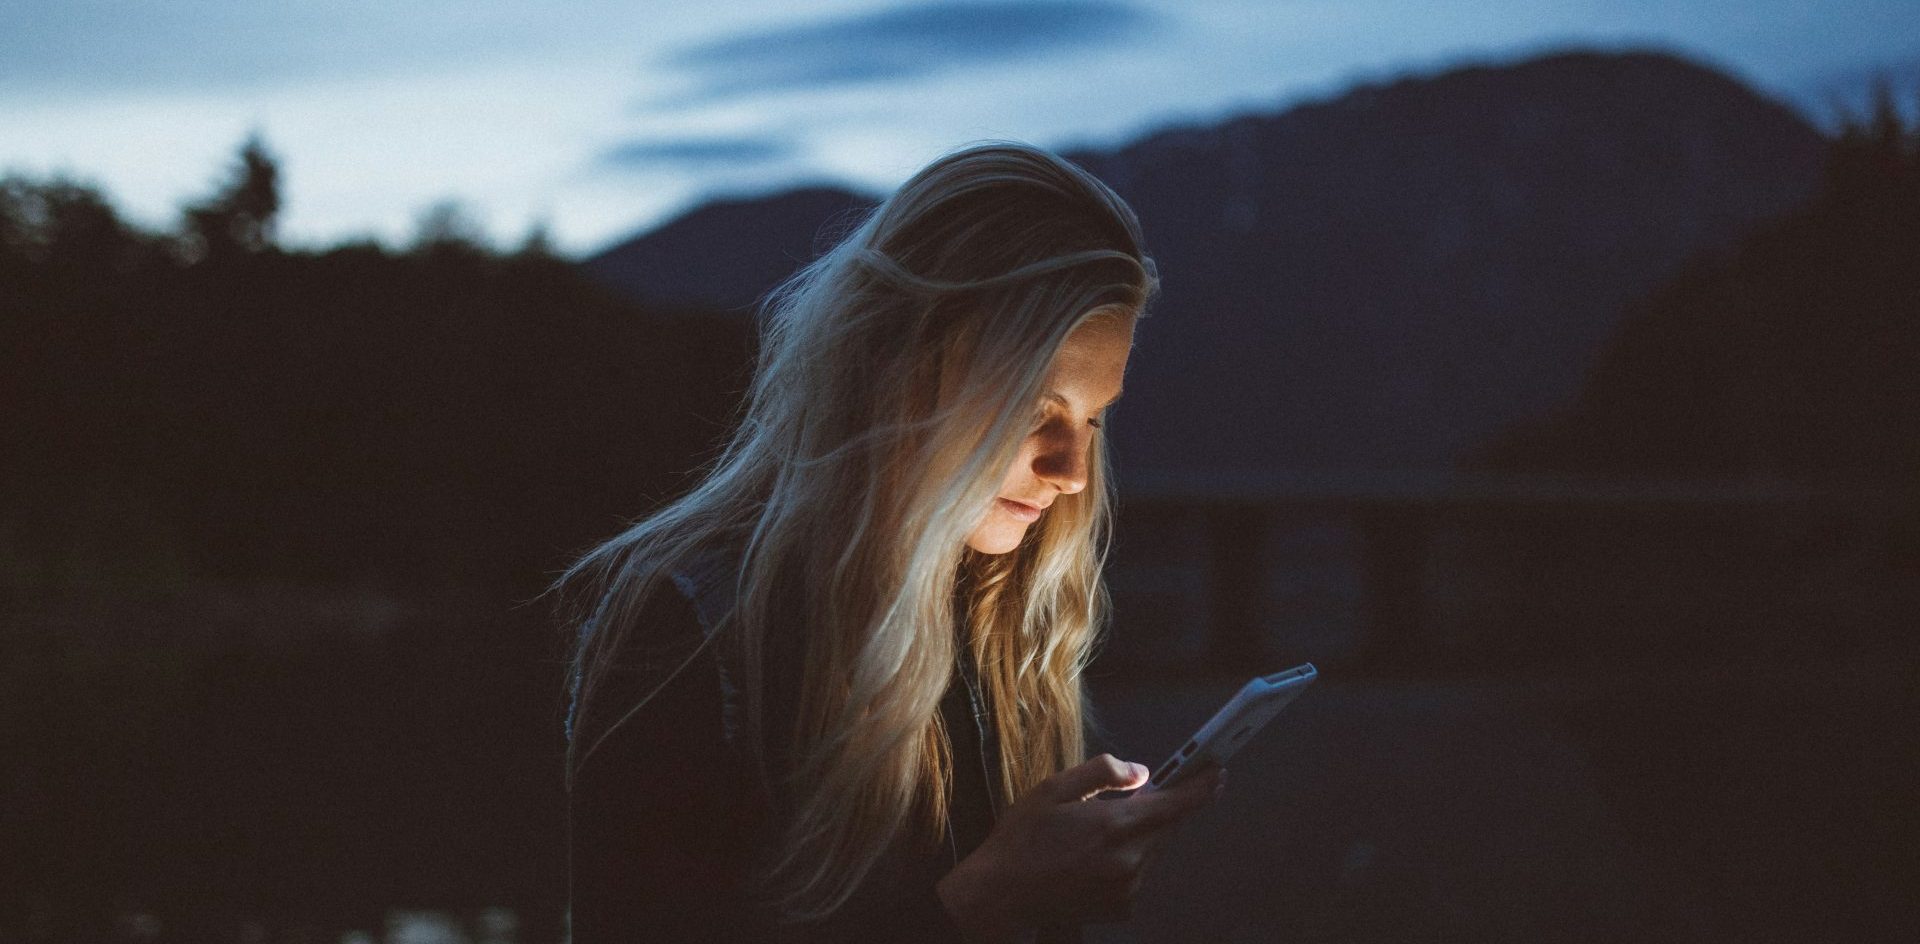 A woman looks at her mobile phone at dusk, the light of the screen illuminating her face. With the majority of many publishers' digital users coming from mobile, we look at how they can reorient their approach to mobile first.